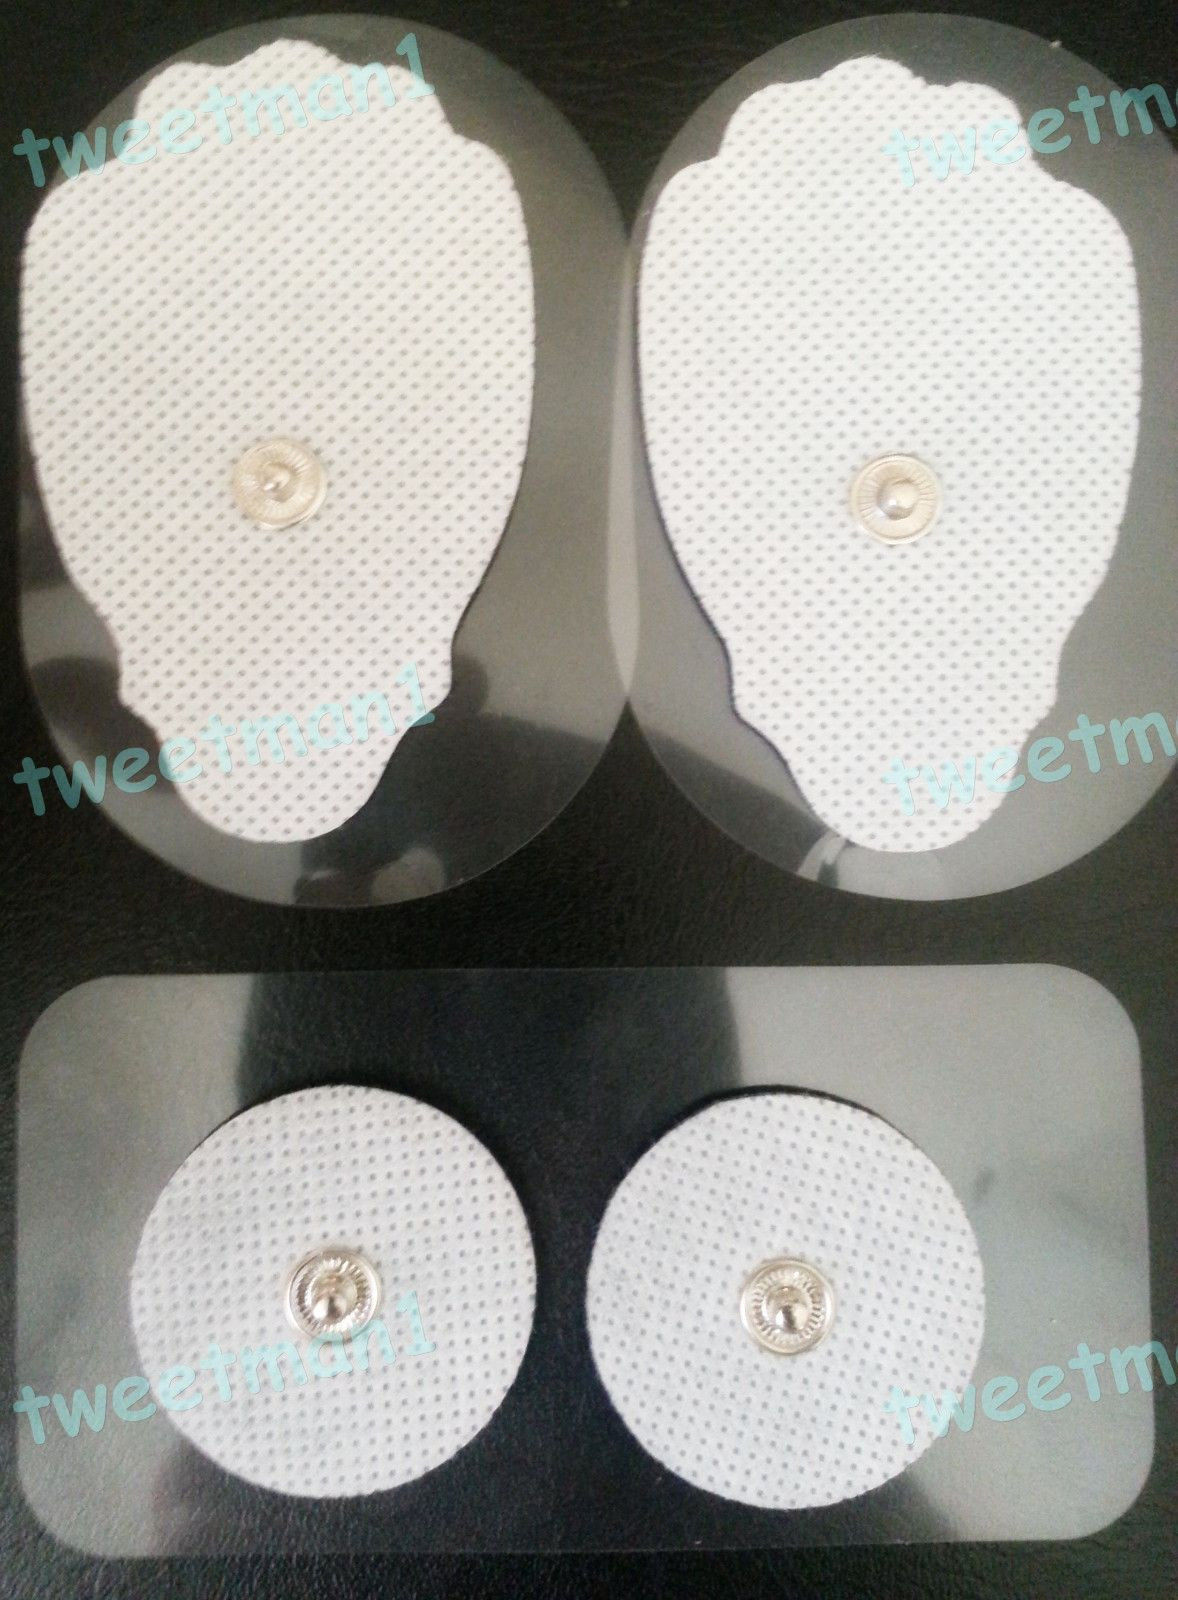 REPLACEMENT ELECTRODE PADS (2 LG, 2 SM) ISMART COMPATIBLE - $8.88